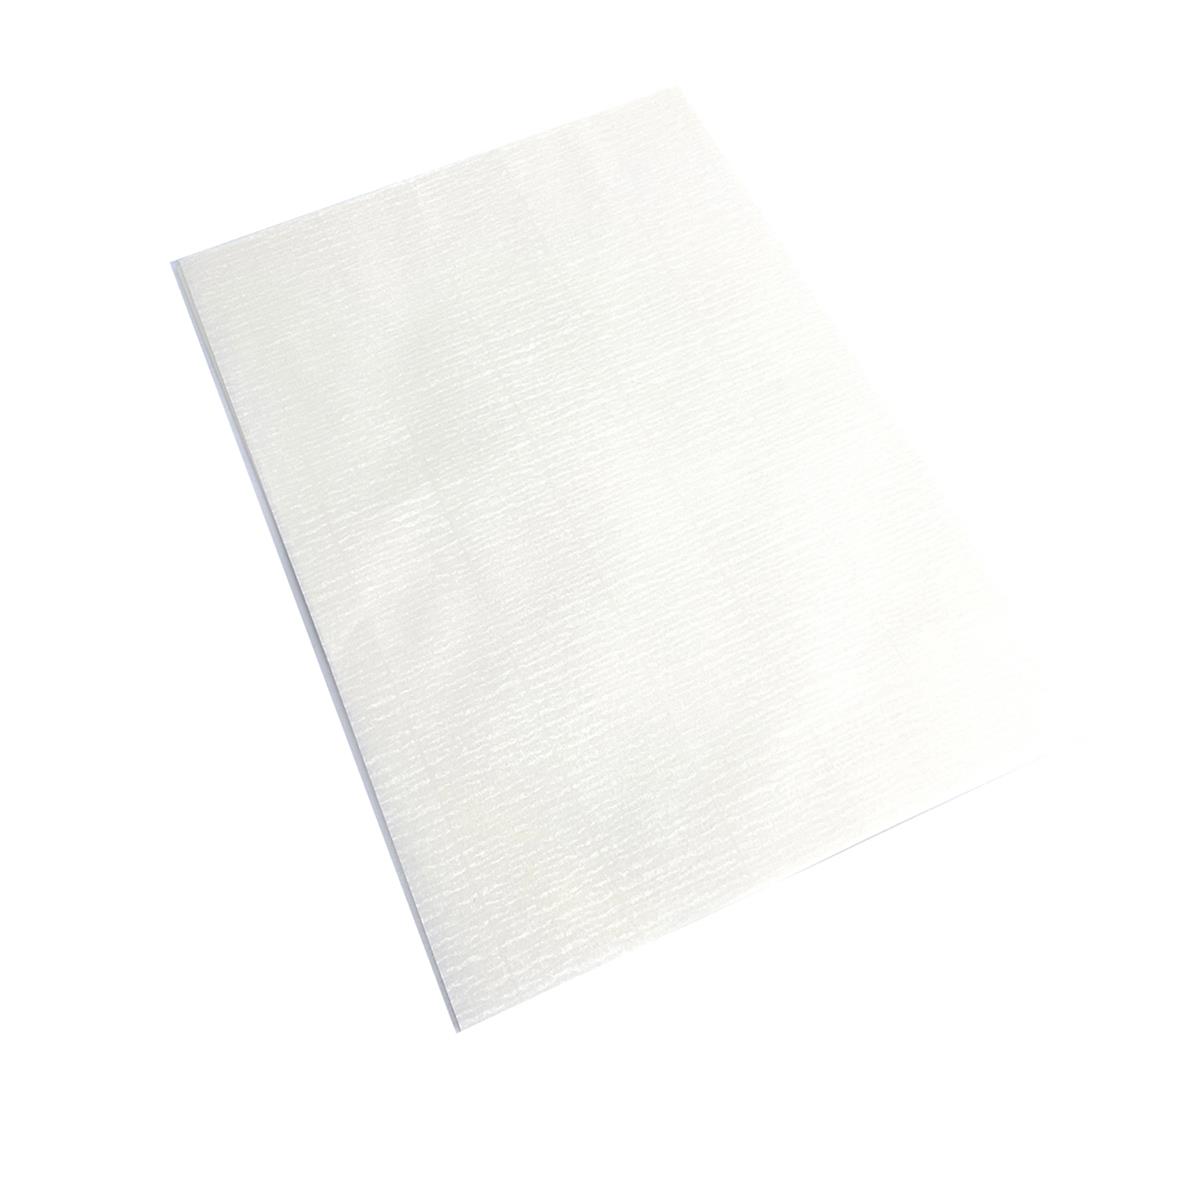 A4 WHITE TEXTURED LAID TRANSLUCENT VELLUM 160gsm x 18 SHEETS | HobbyMaker